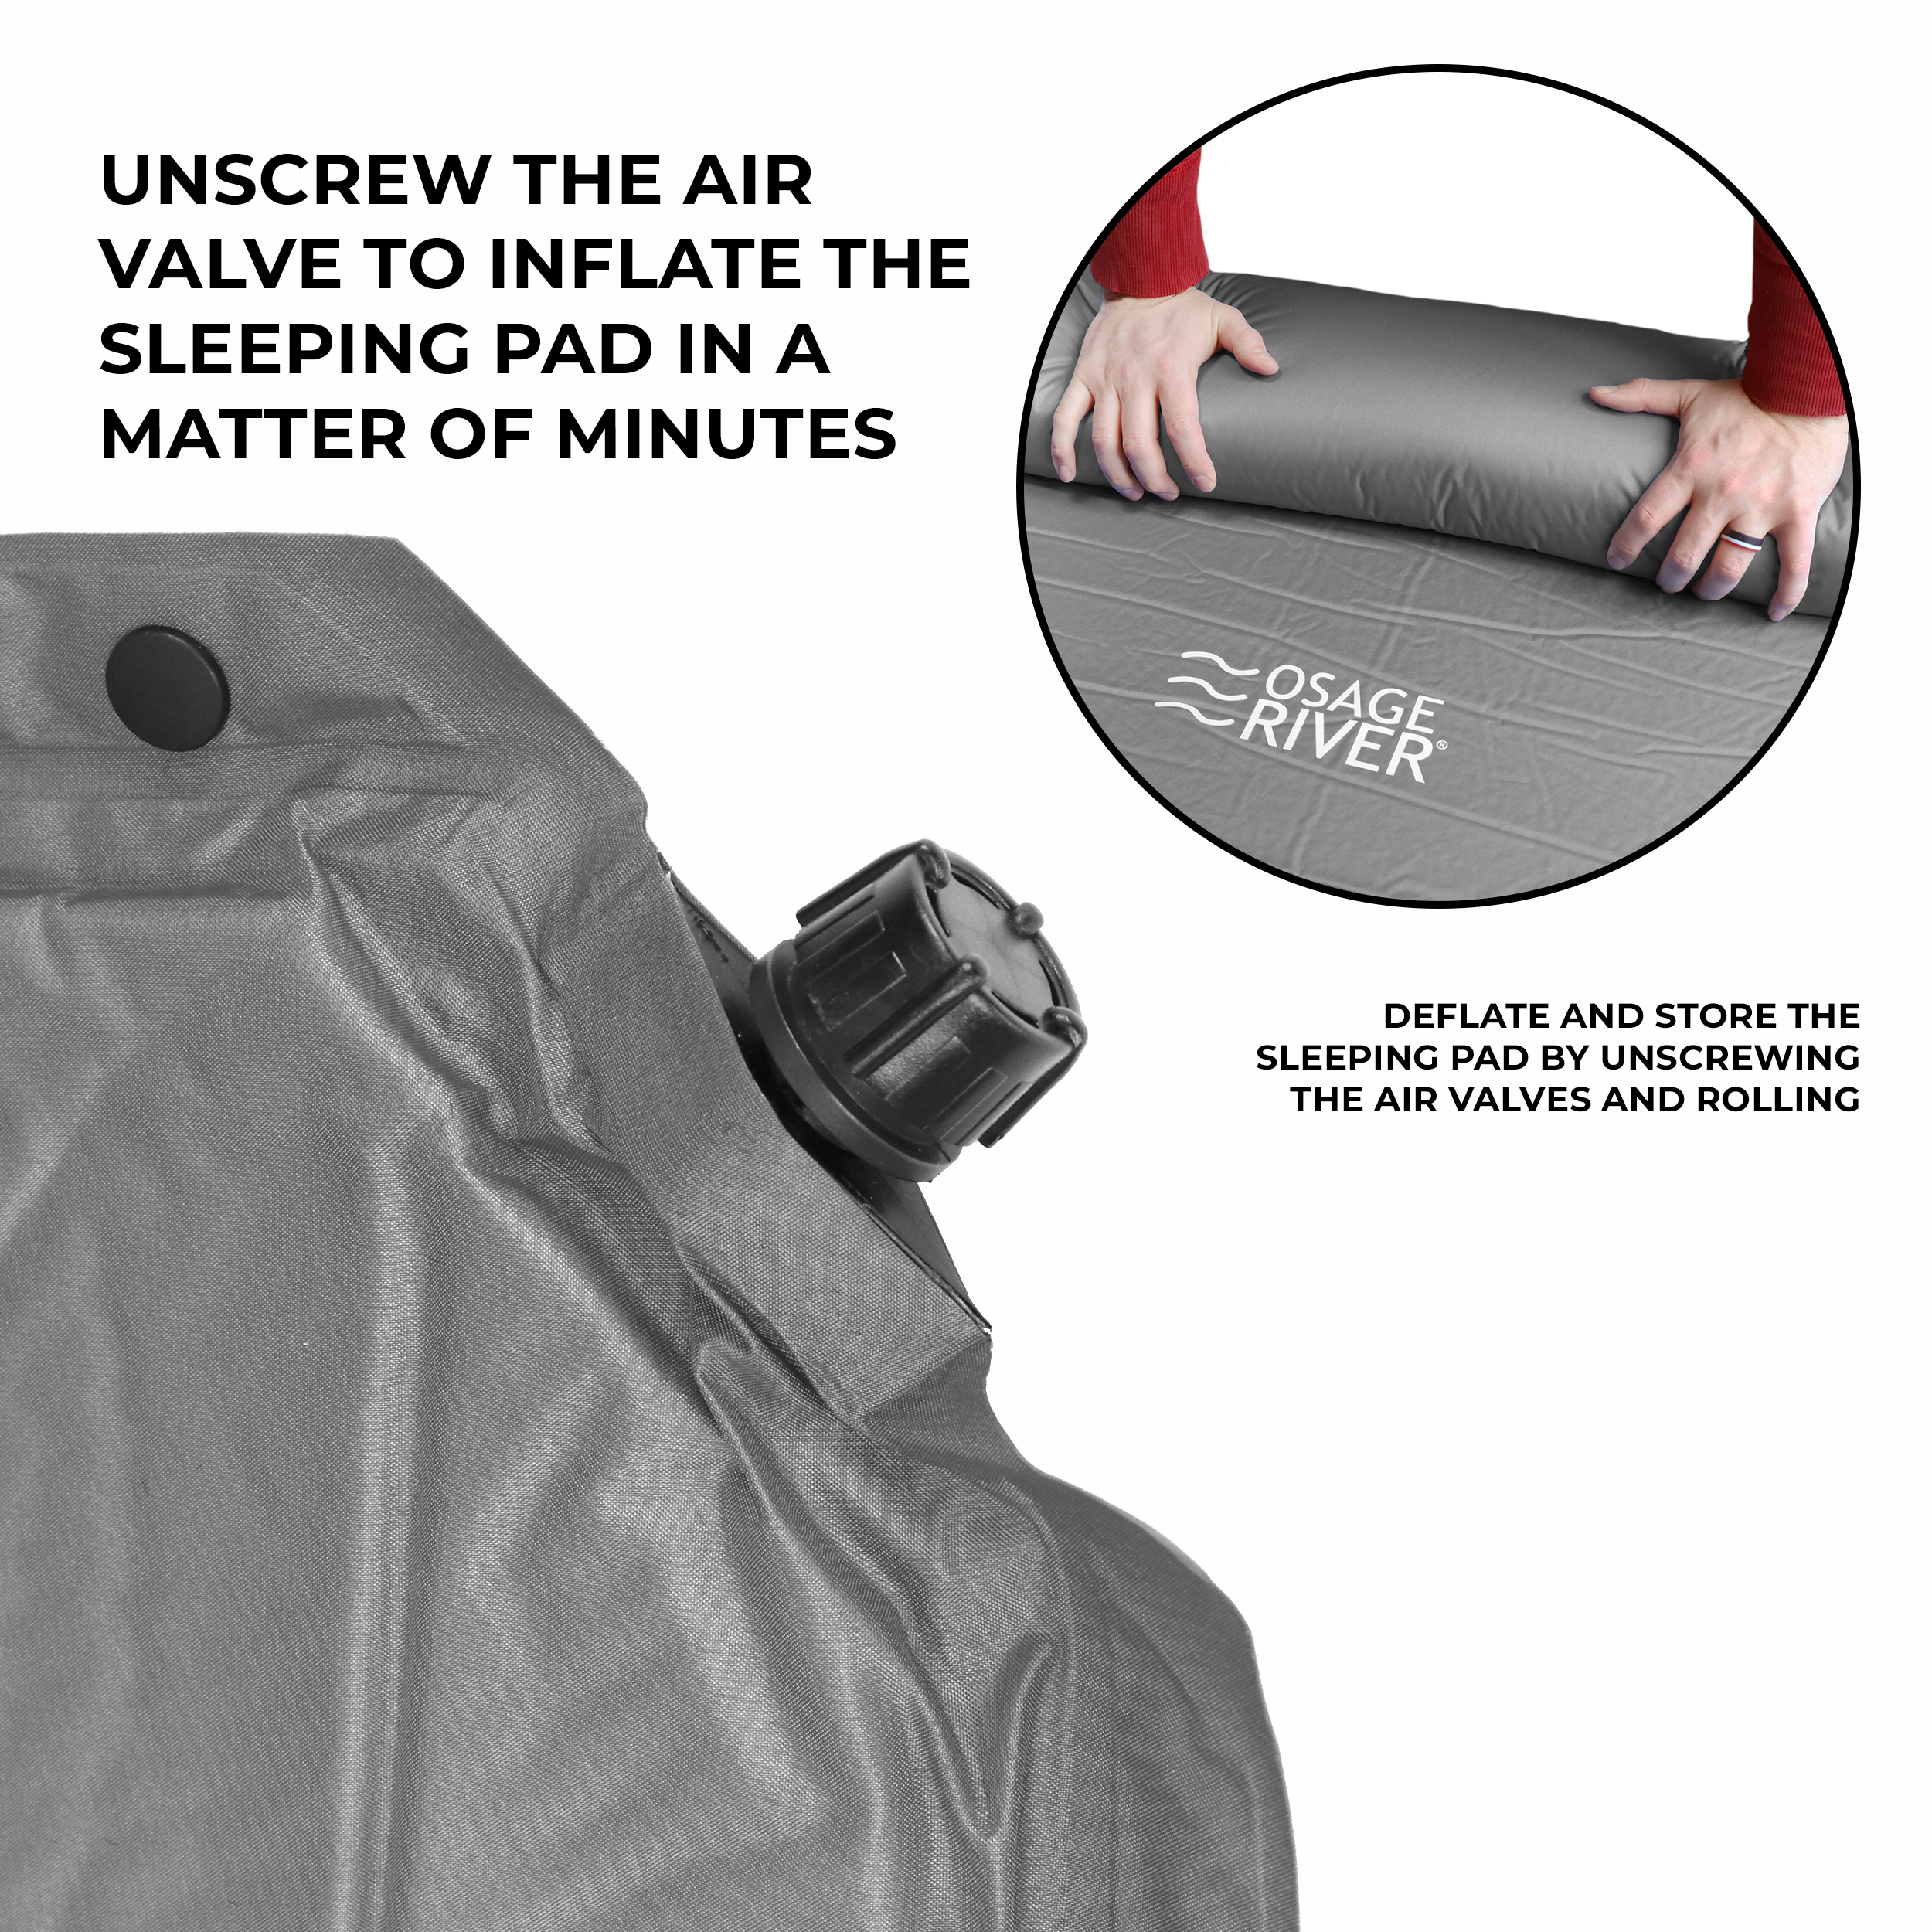 OSAGE RIVER Self Inflating Sleeping Pad with Built-in Pillow, Compact Memory Foam Sleep Mat, Camping Air Mattress for Tent, Travel, Backpacking, or Hiking, Grey - image 4 of 6